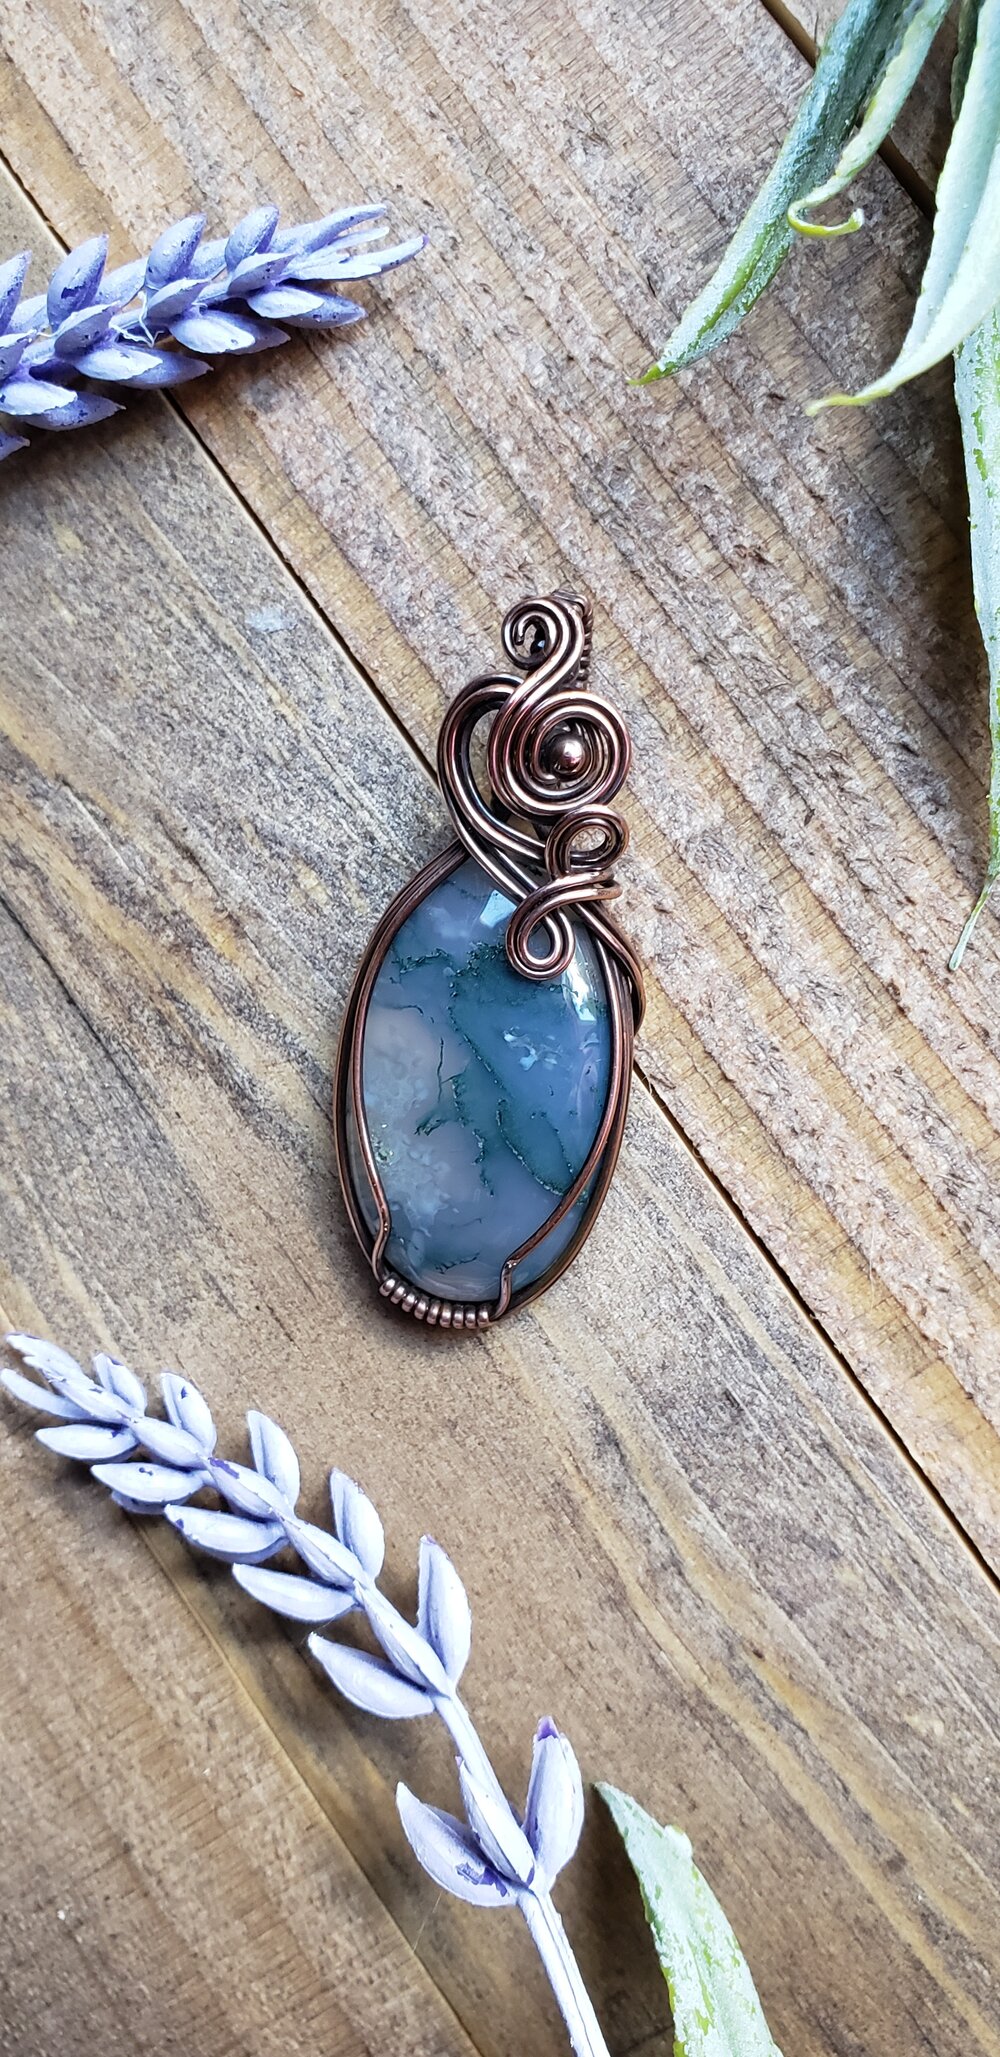 Copper and Gray Agate Wire Wrapped Pendant-Copper and Agate Pendant-Copper Pendant-Agate and Copper Pendant-Wire Wrapped Copper Pendant